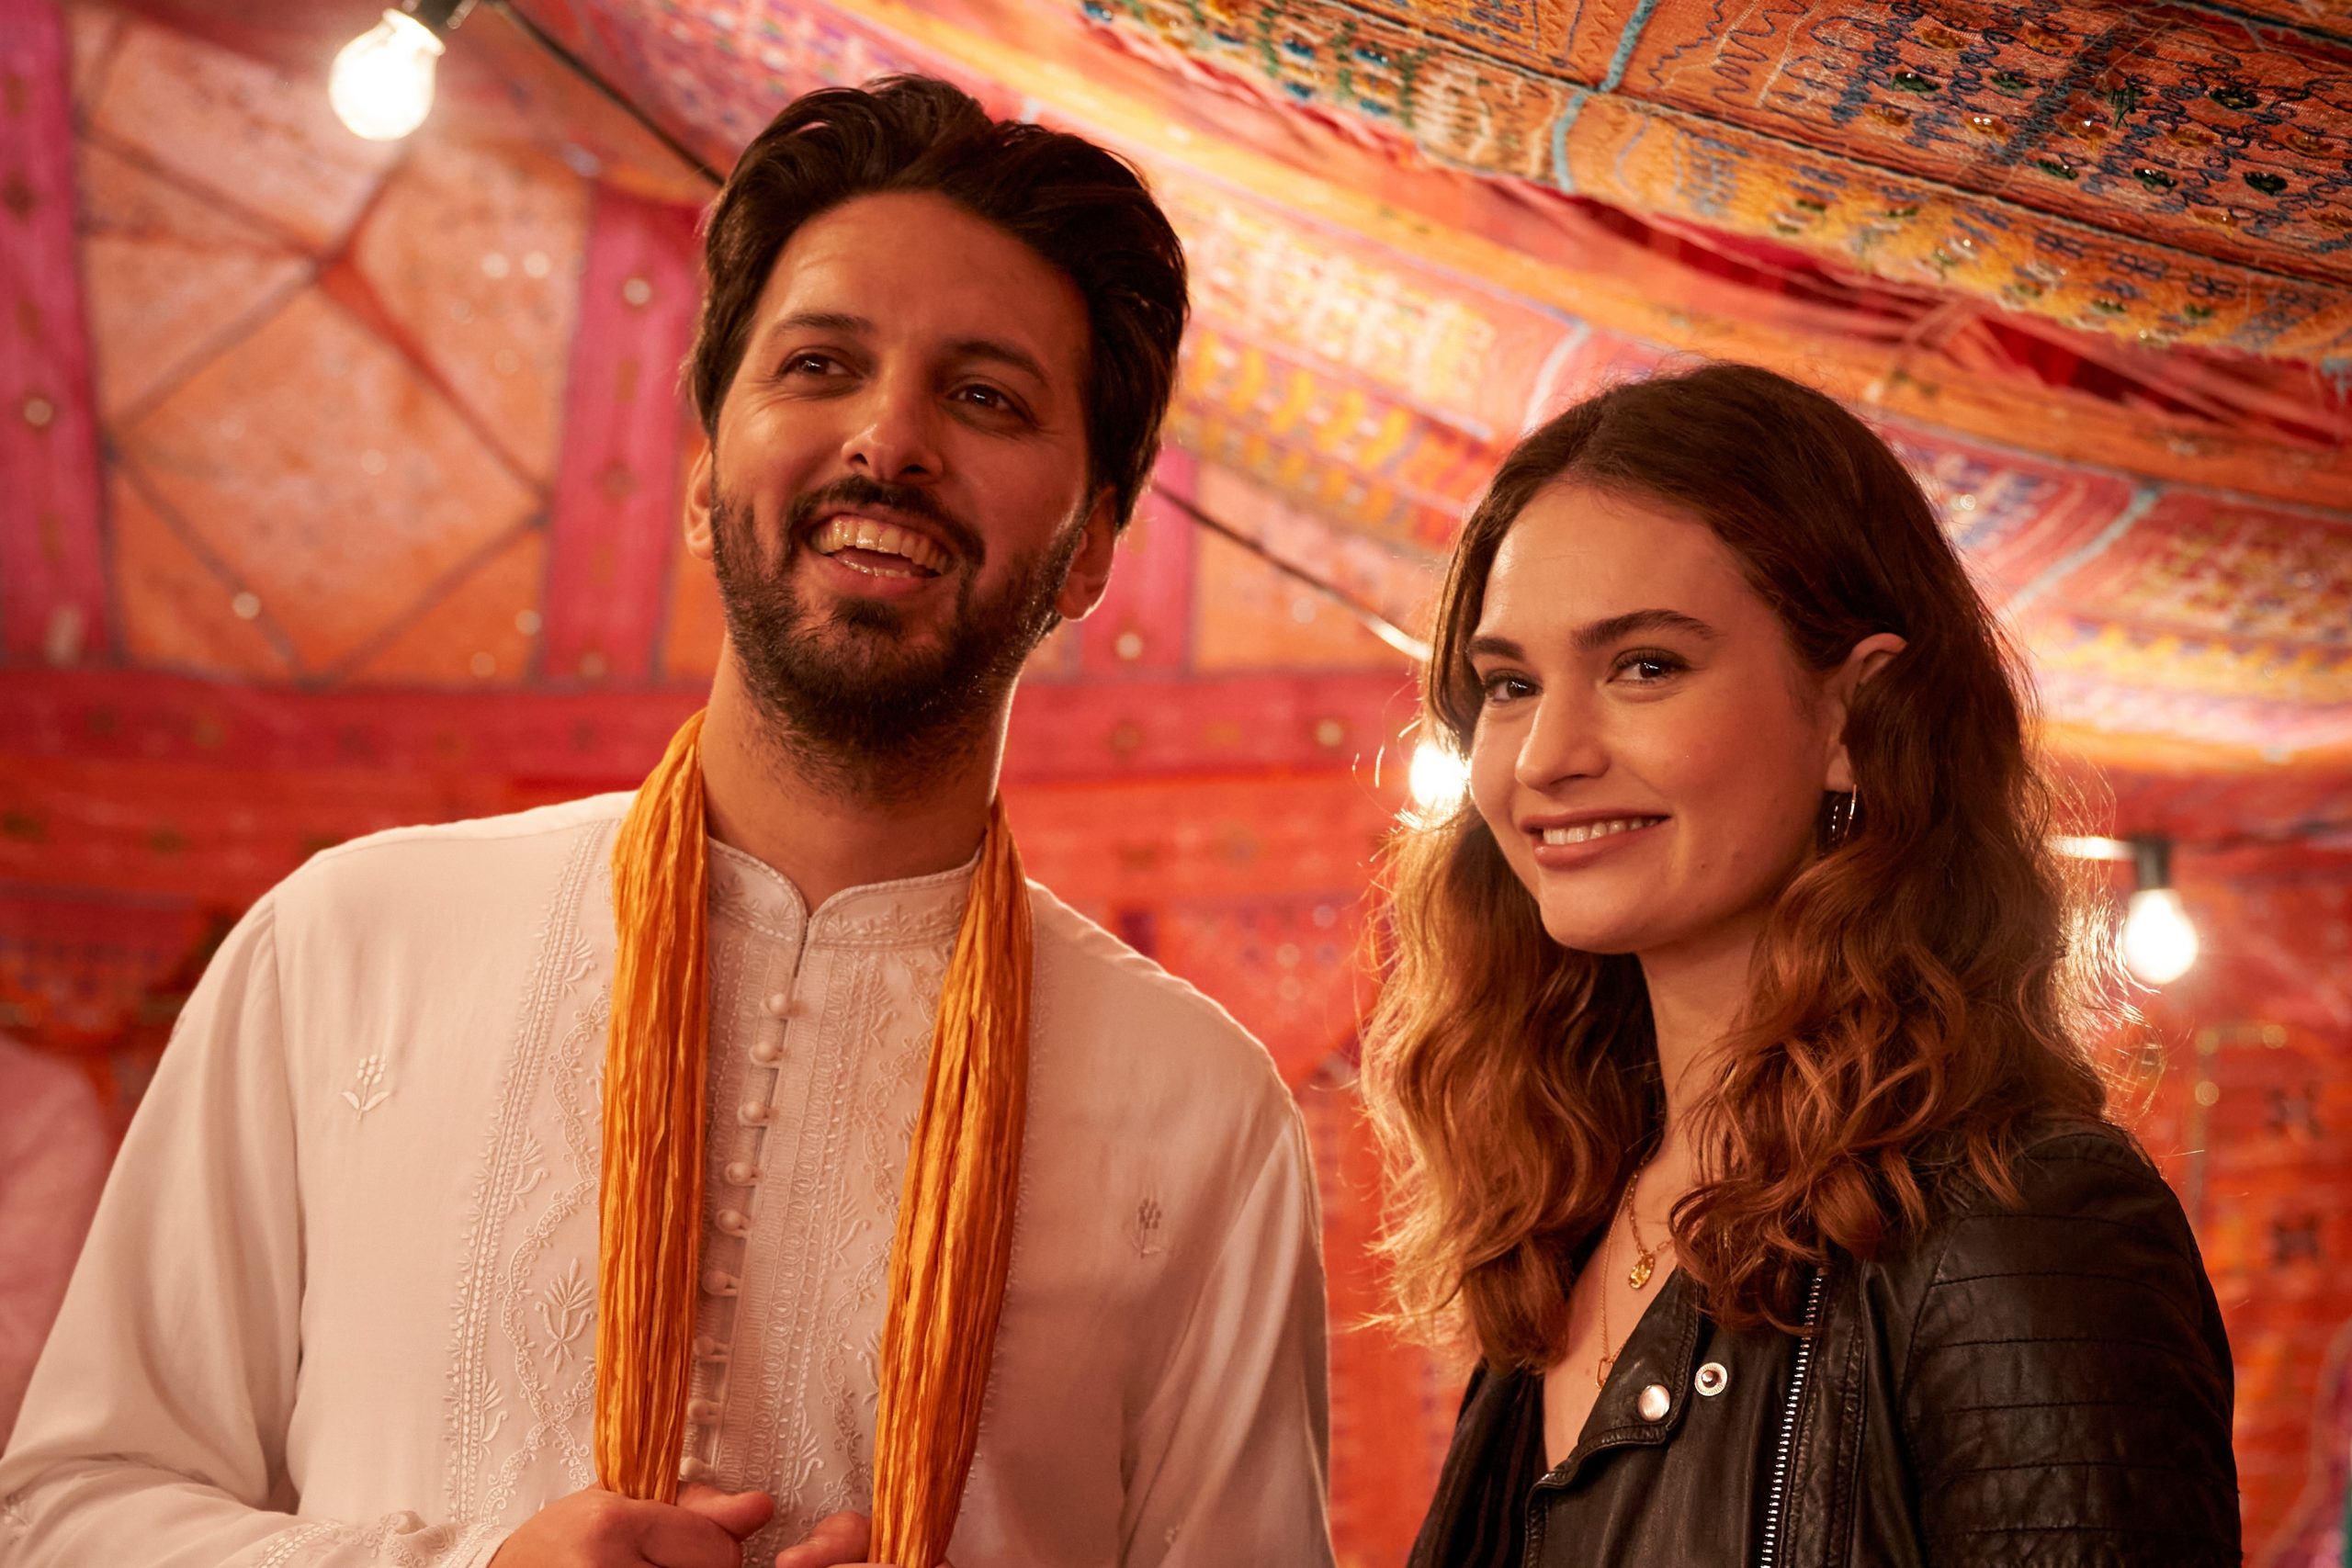 Shazad Latif und Lily James in "What's Love Got To Do With It"